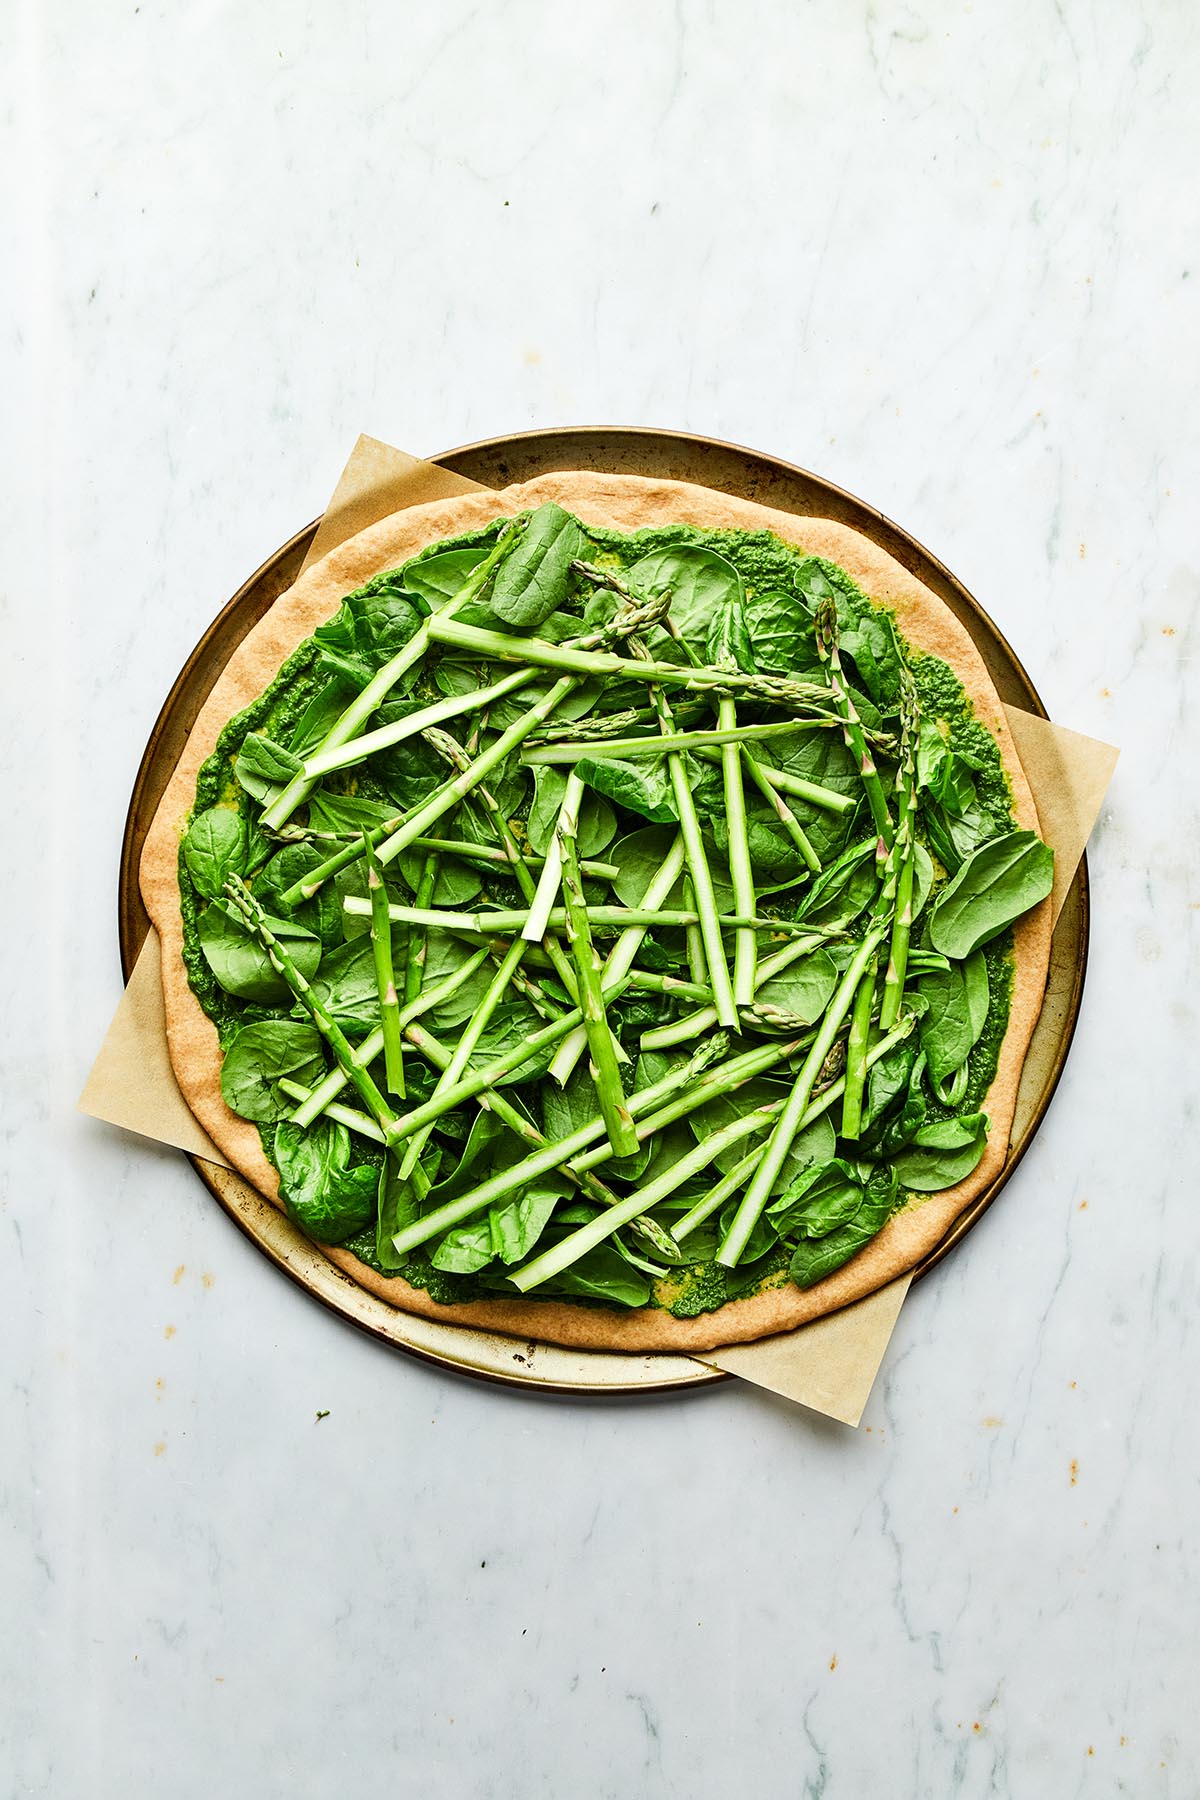 An unbaked pizza topped with spinach and asparagus.